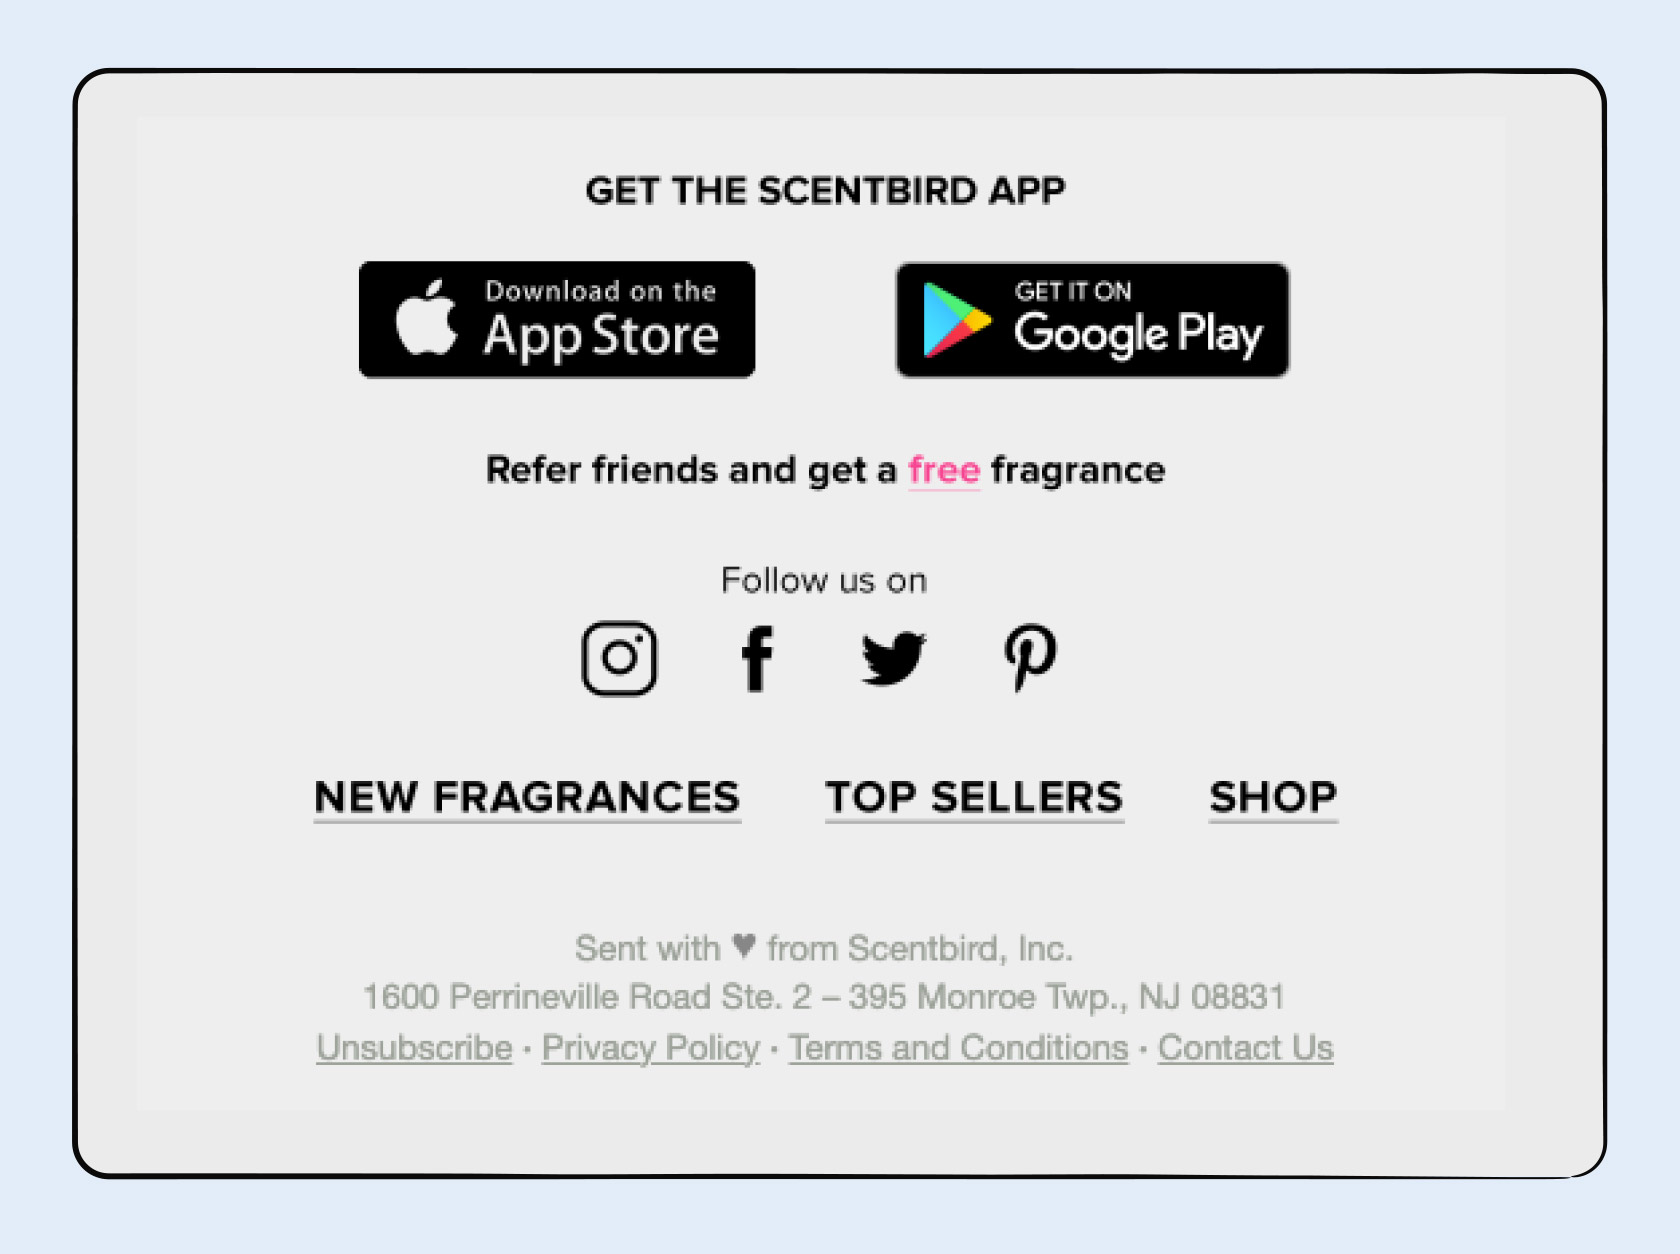 Scentbird email footer.